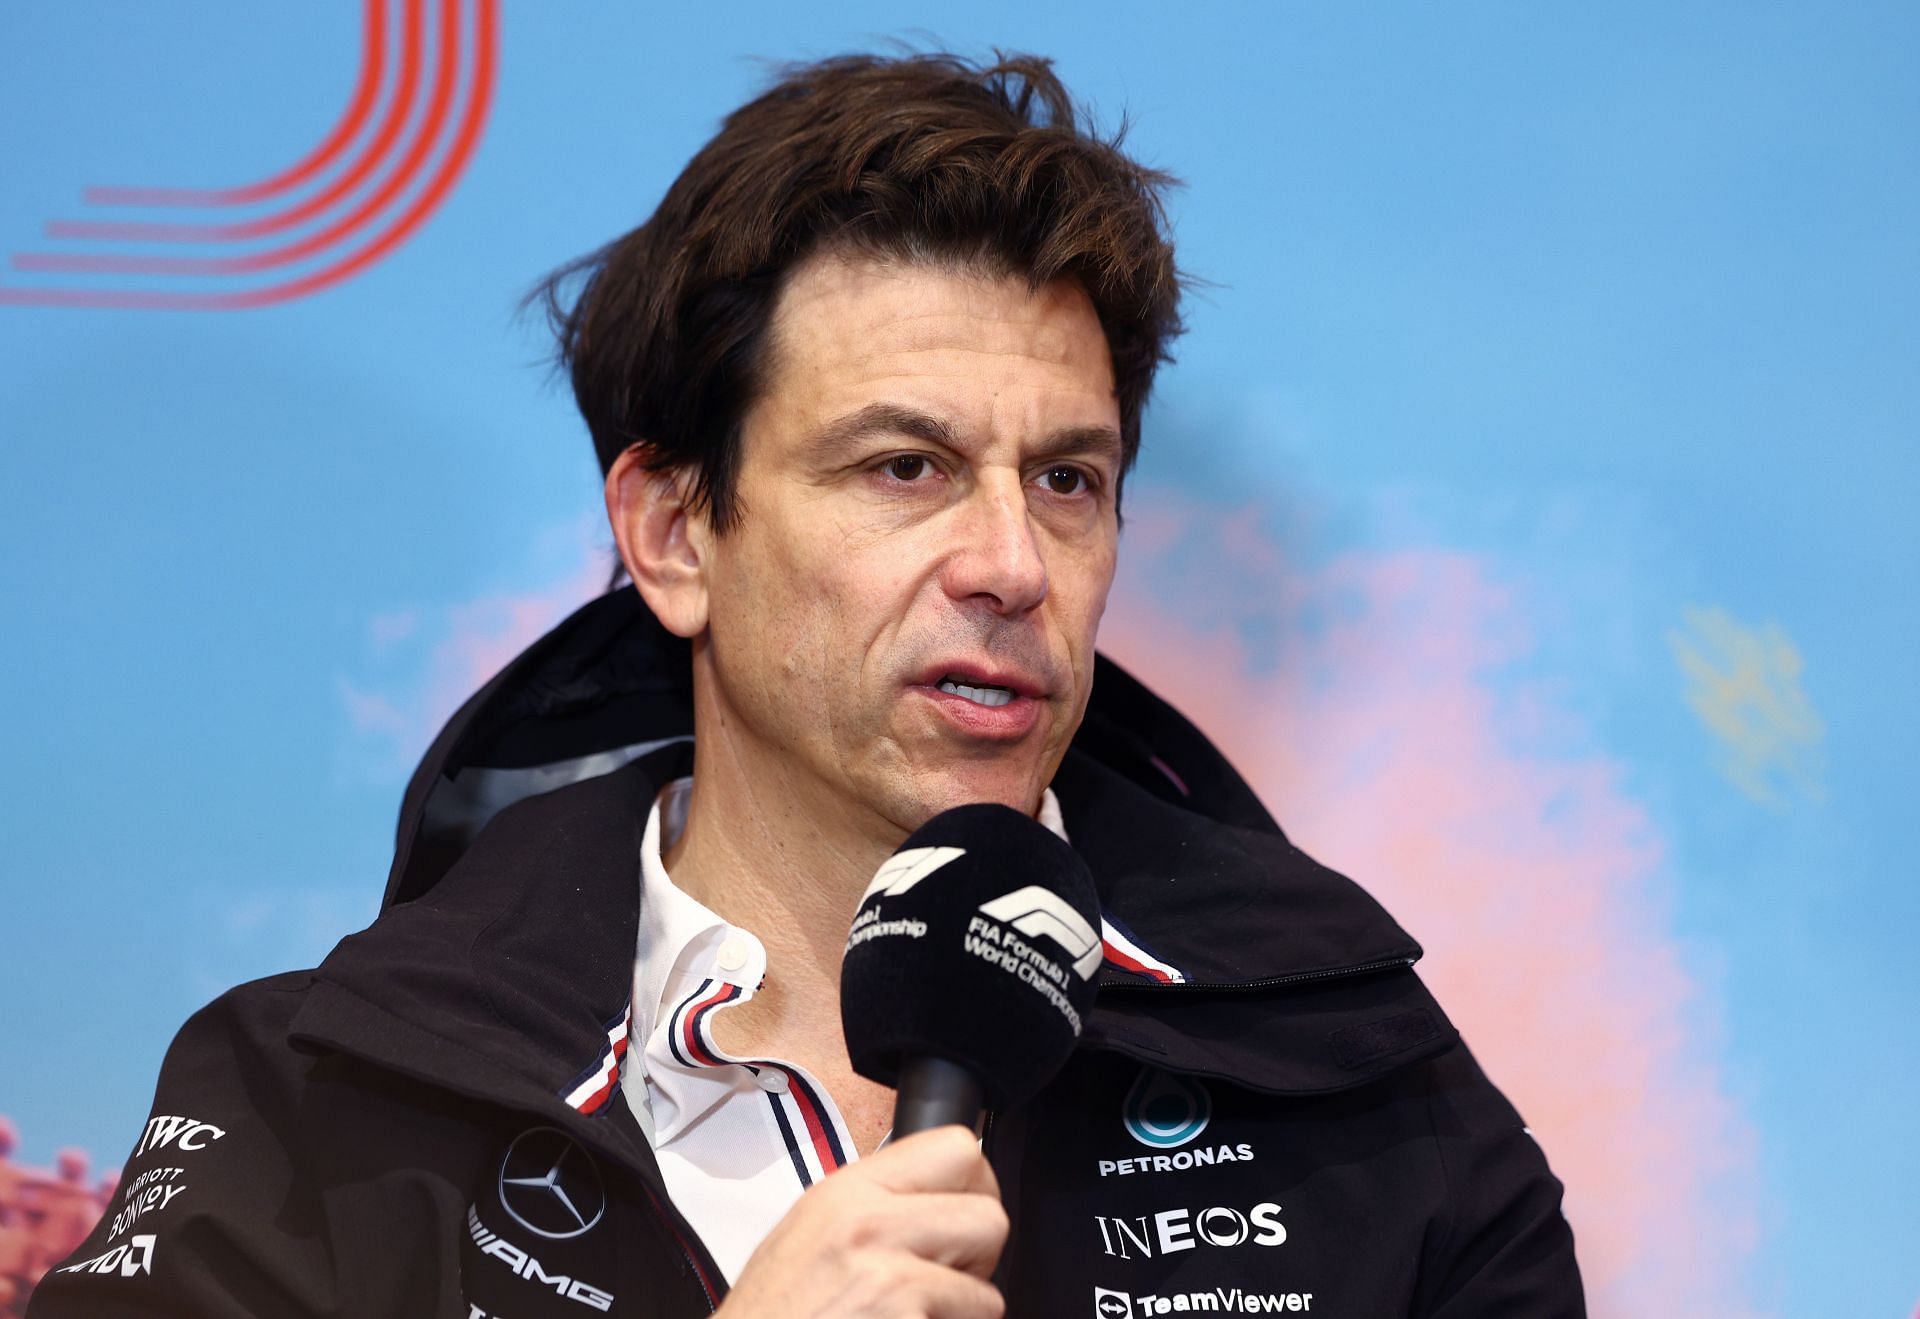 Mercedes team principal Toto Wolff speaks to the media. (Photo by Clive Rose/Getty Images)